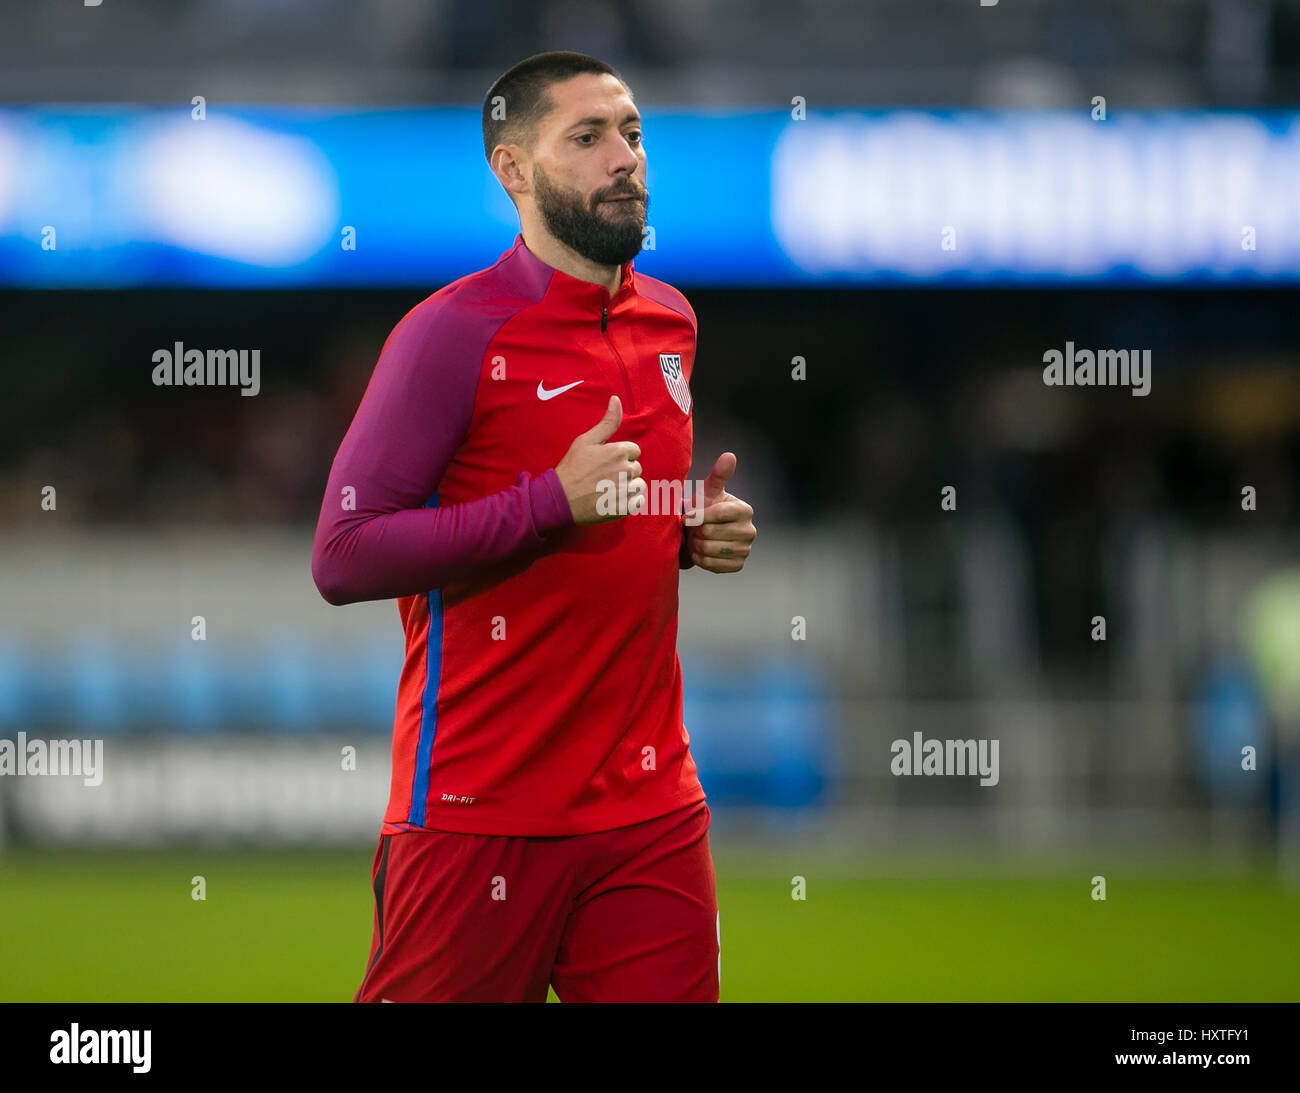 March 24, 2017: US forward Clint Dempsey (8) warms up prior to the FIFA World Cup Qualifying game between the United States and Honduras at Avaya Stadium in San Jose, CA. The US defeated Honduras 6-0. Damon Tarver/Cal Sport Media Stock Photo